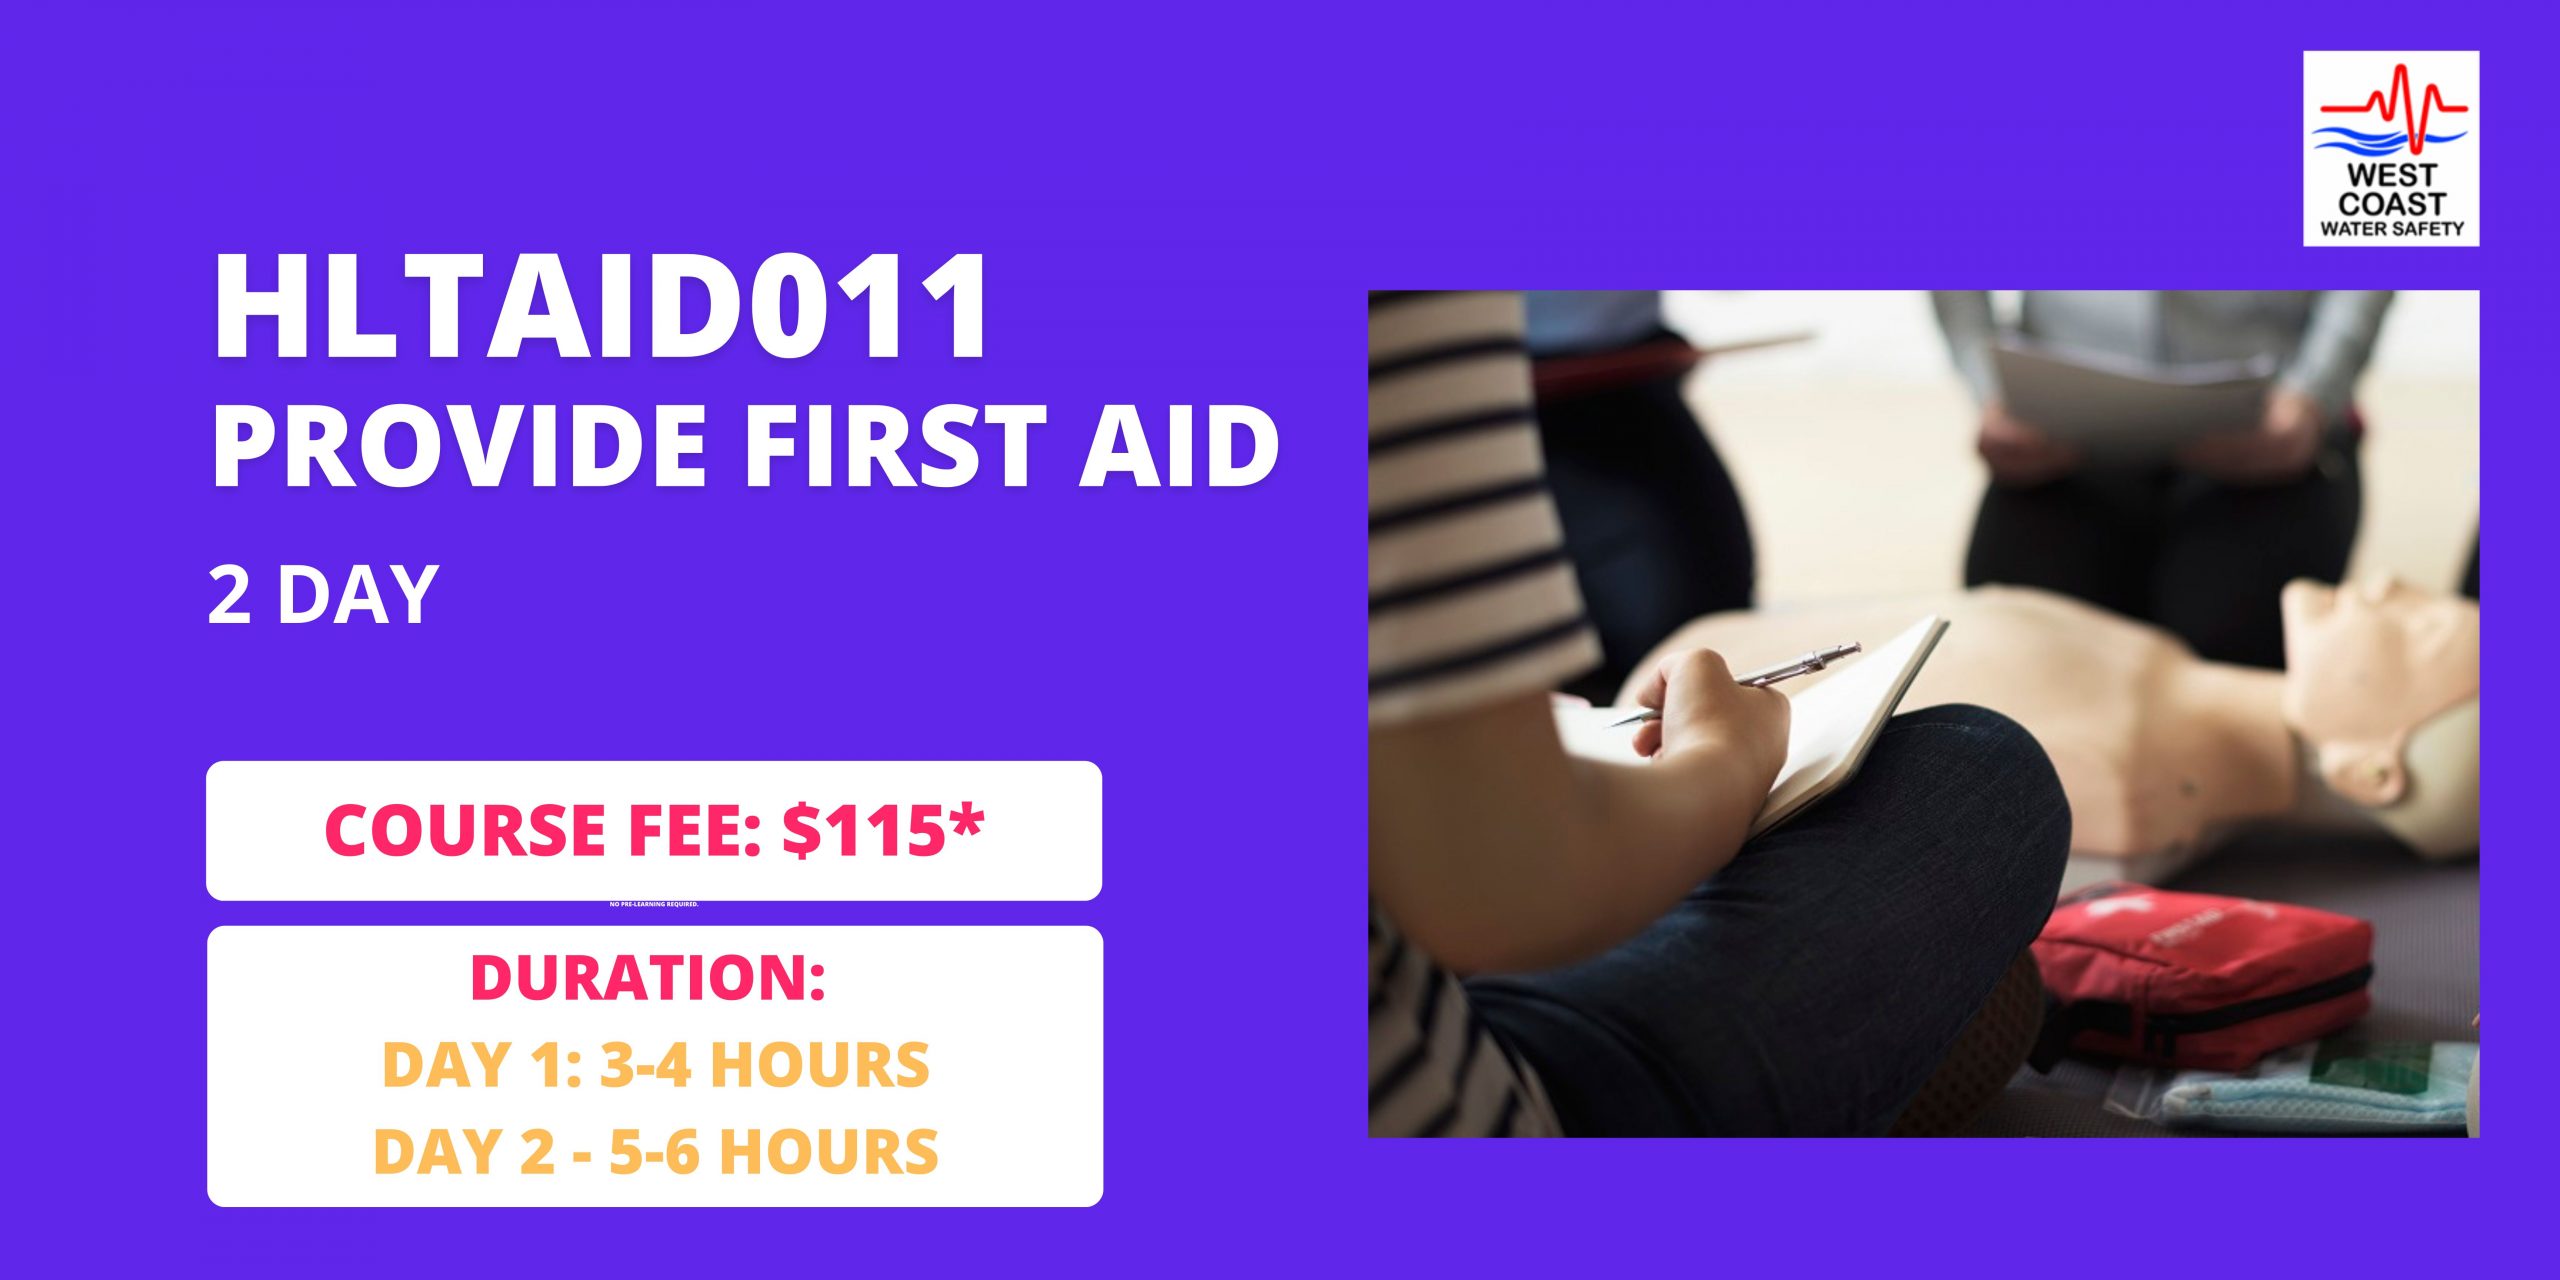 HLTAID011 - 2 Day - Provide First Aid